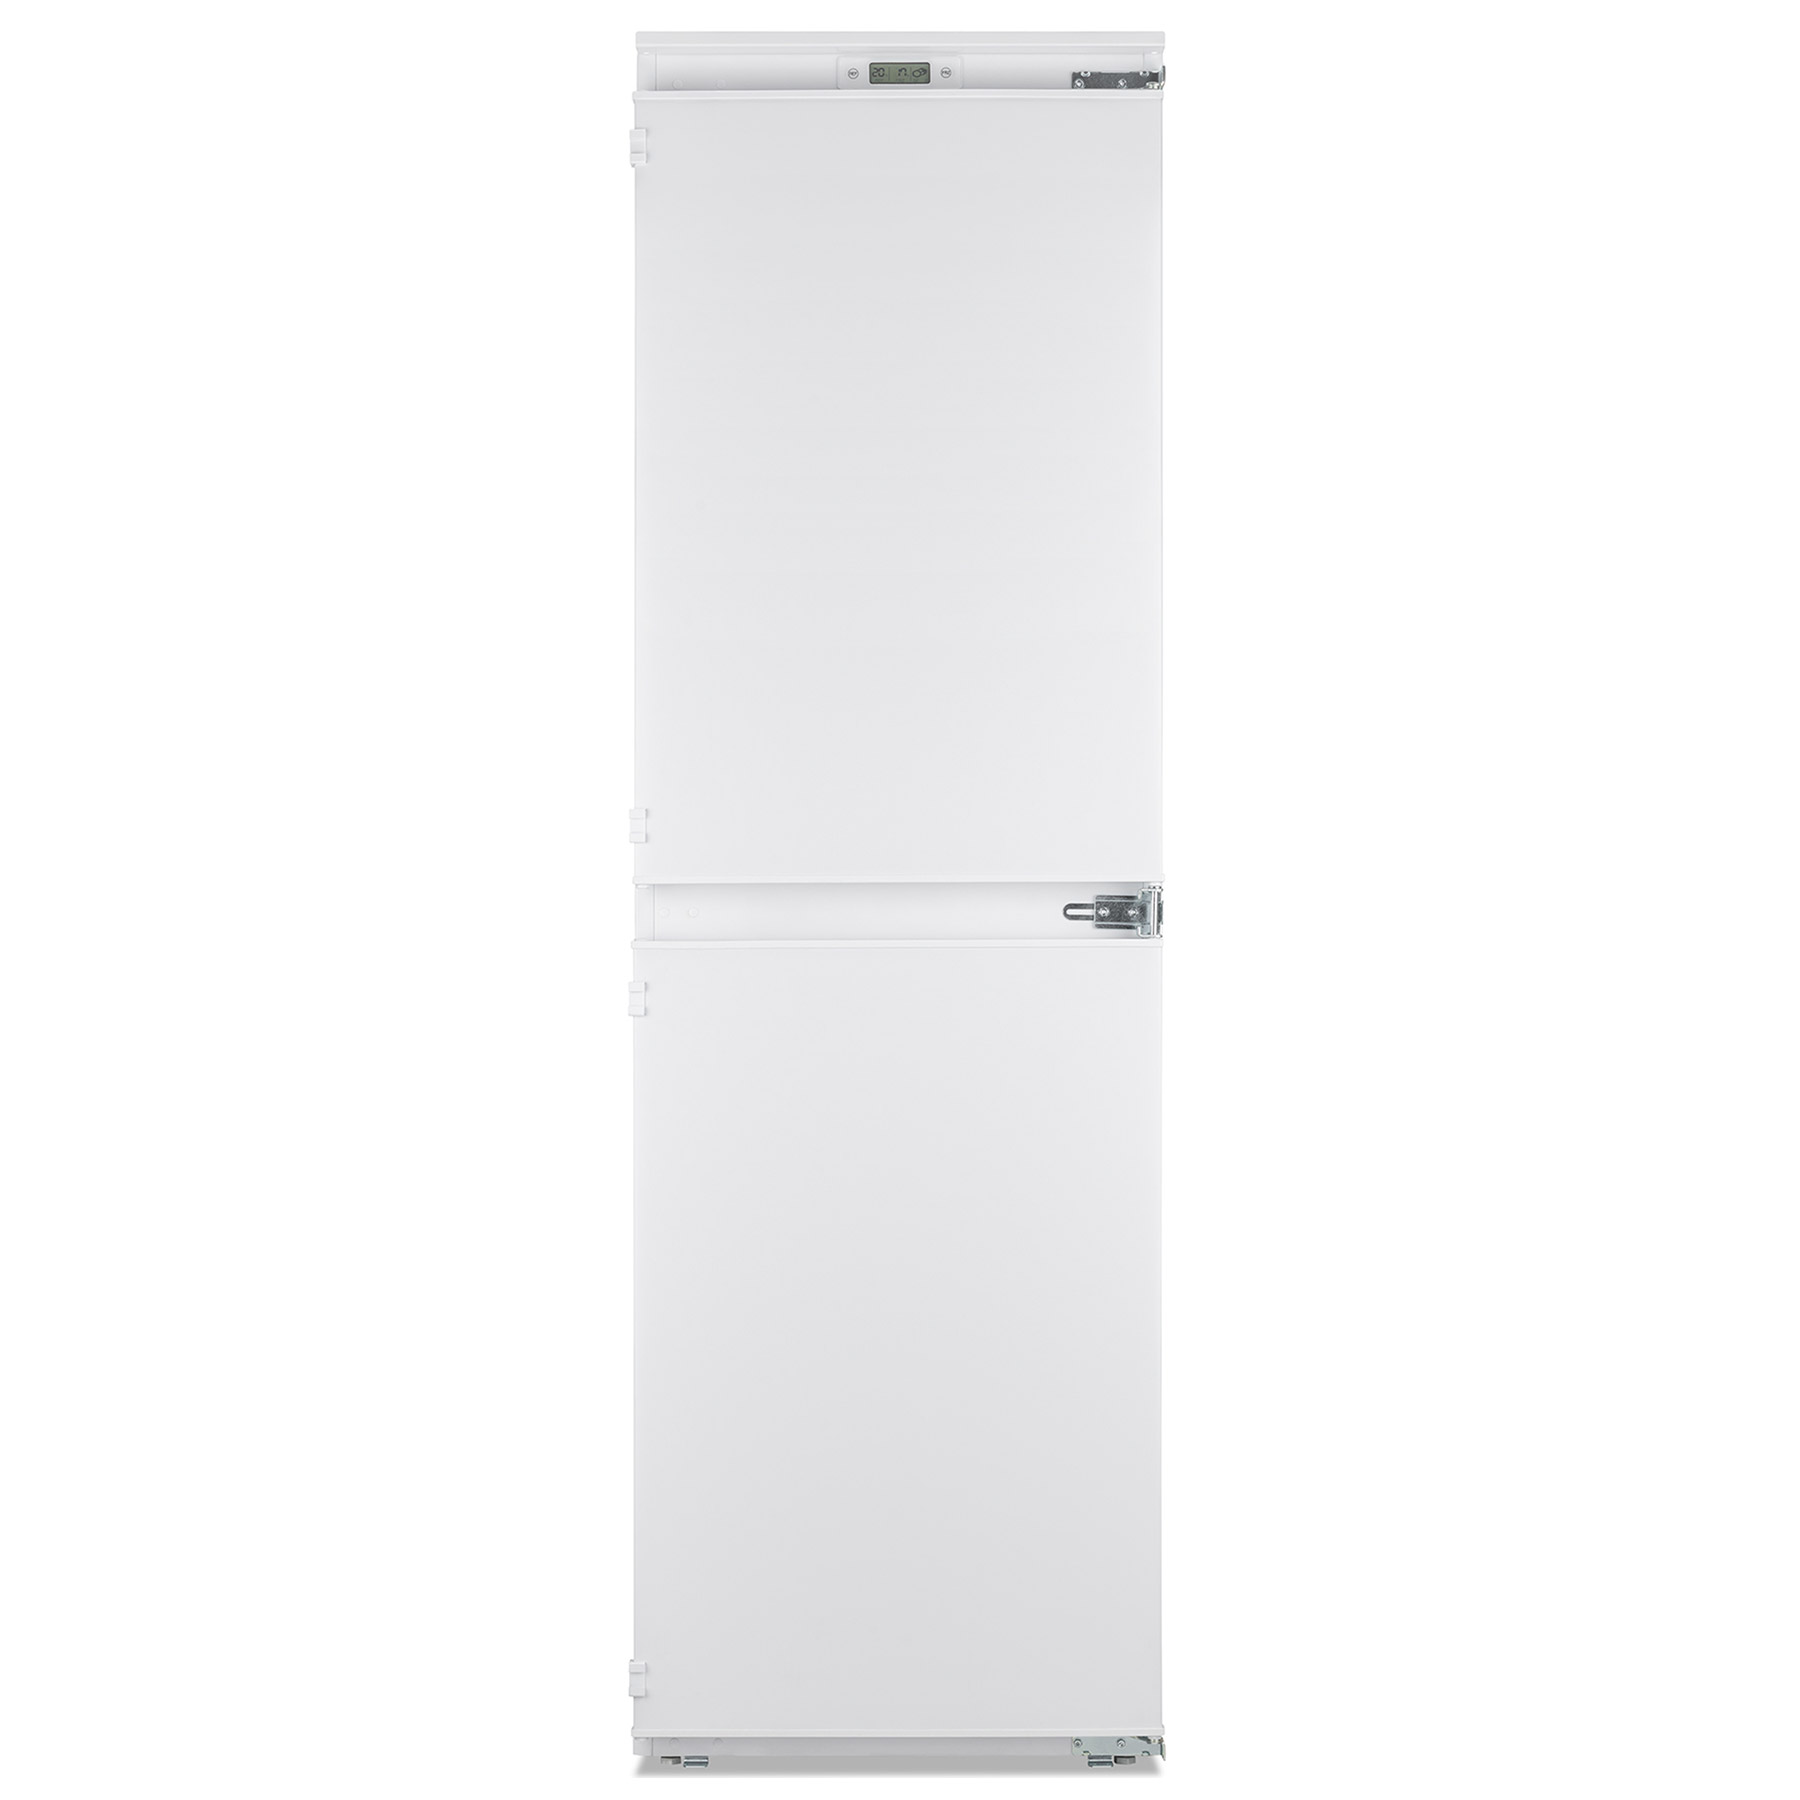 Image of Montpellier MIFF502 Integrated Fridge Freezer 50 50 1 77m F Rated